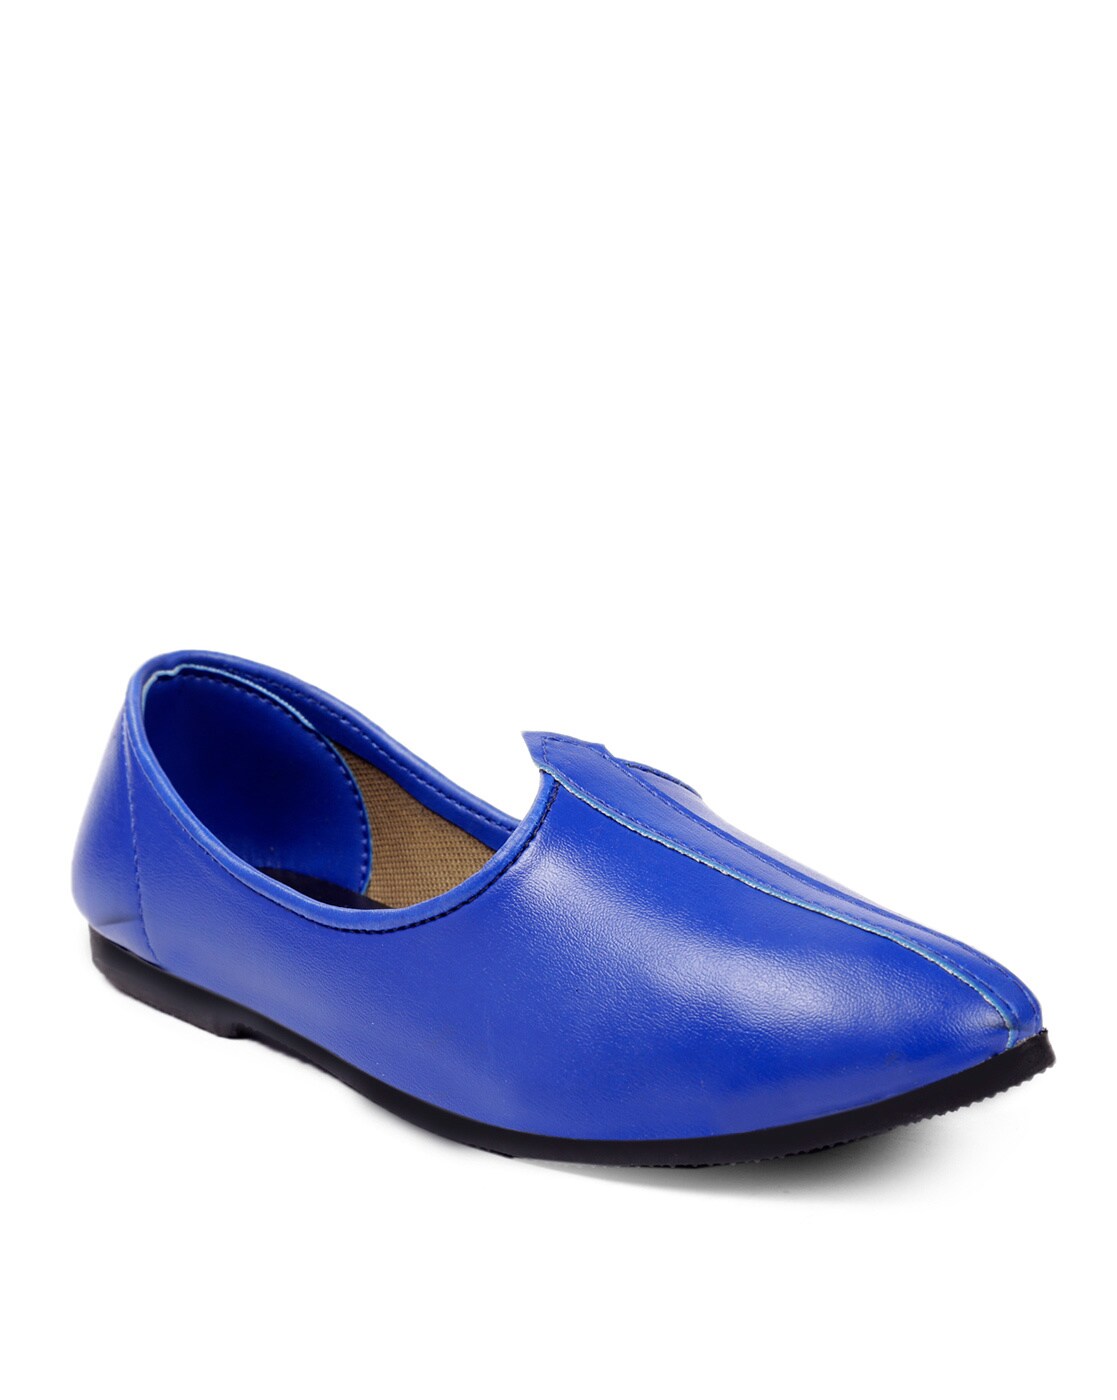 royal blue casual shoes